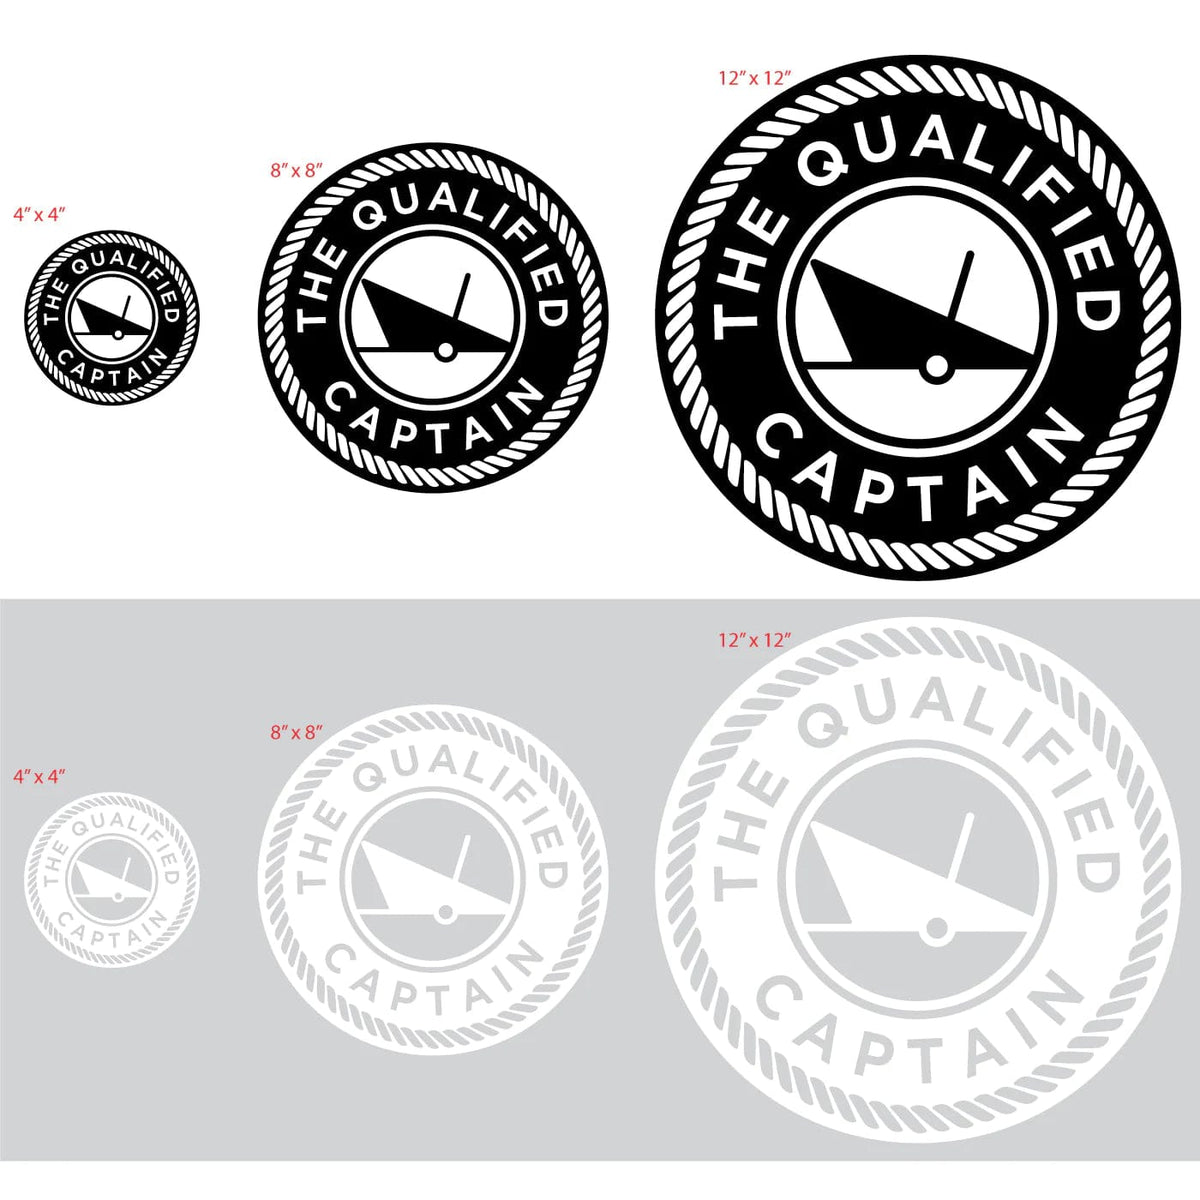 The Qualified Captain Vinyl Decal